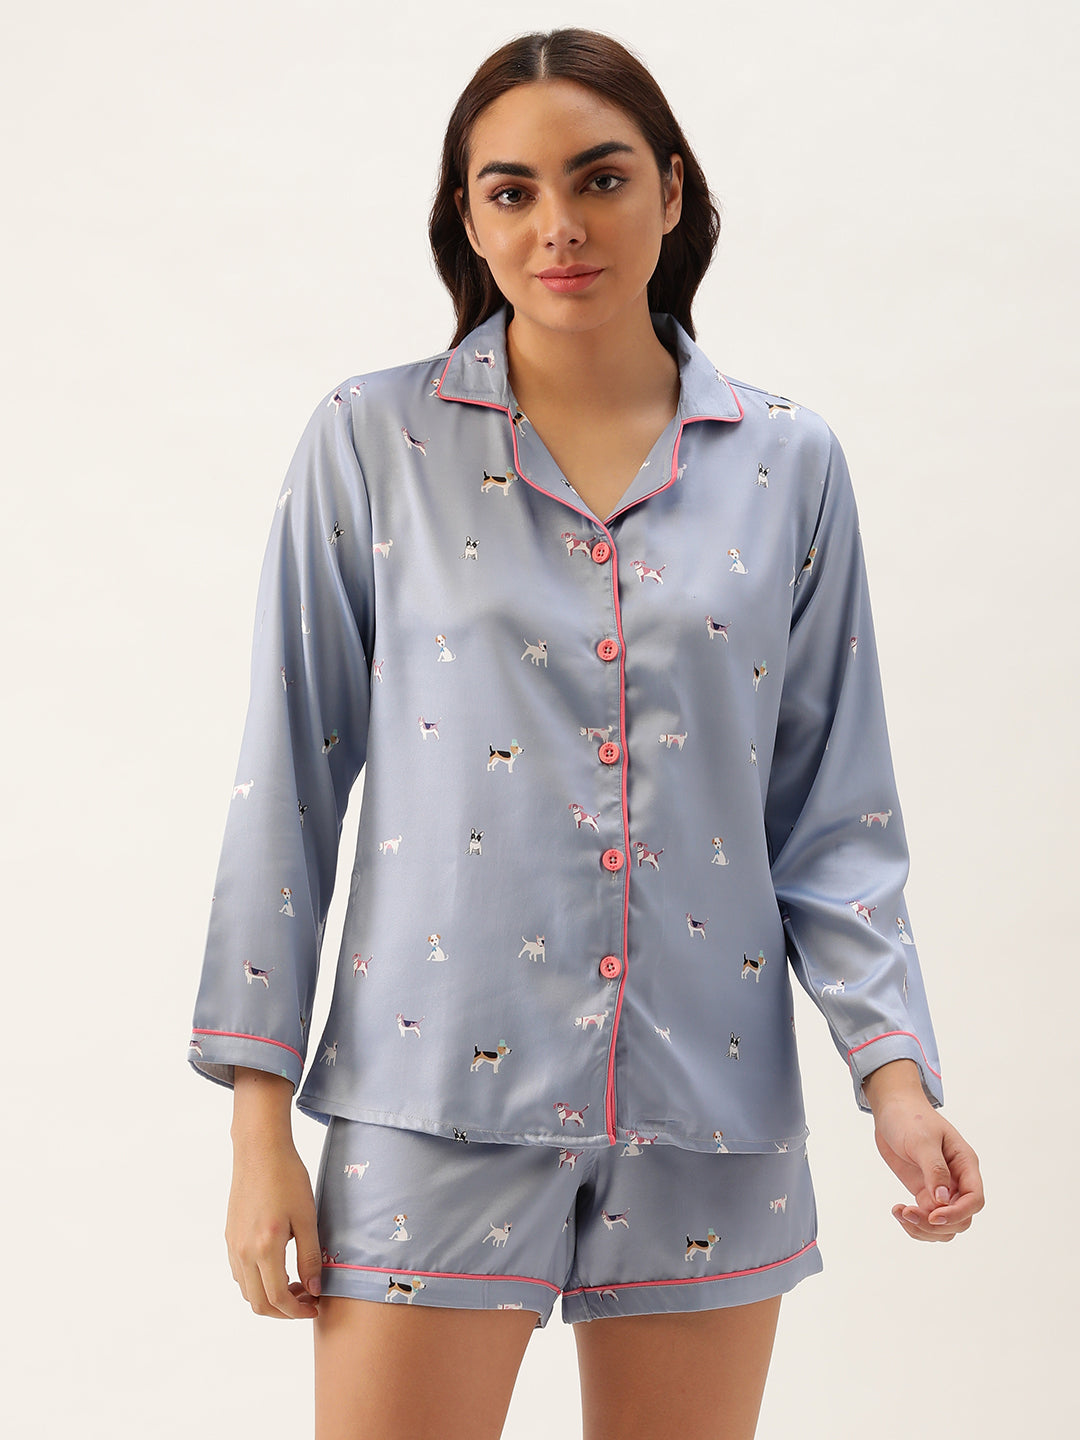 Animal Printed Women 3 pcs Button Up Nightsuit with Shorts (Blue)